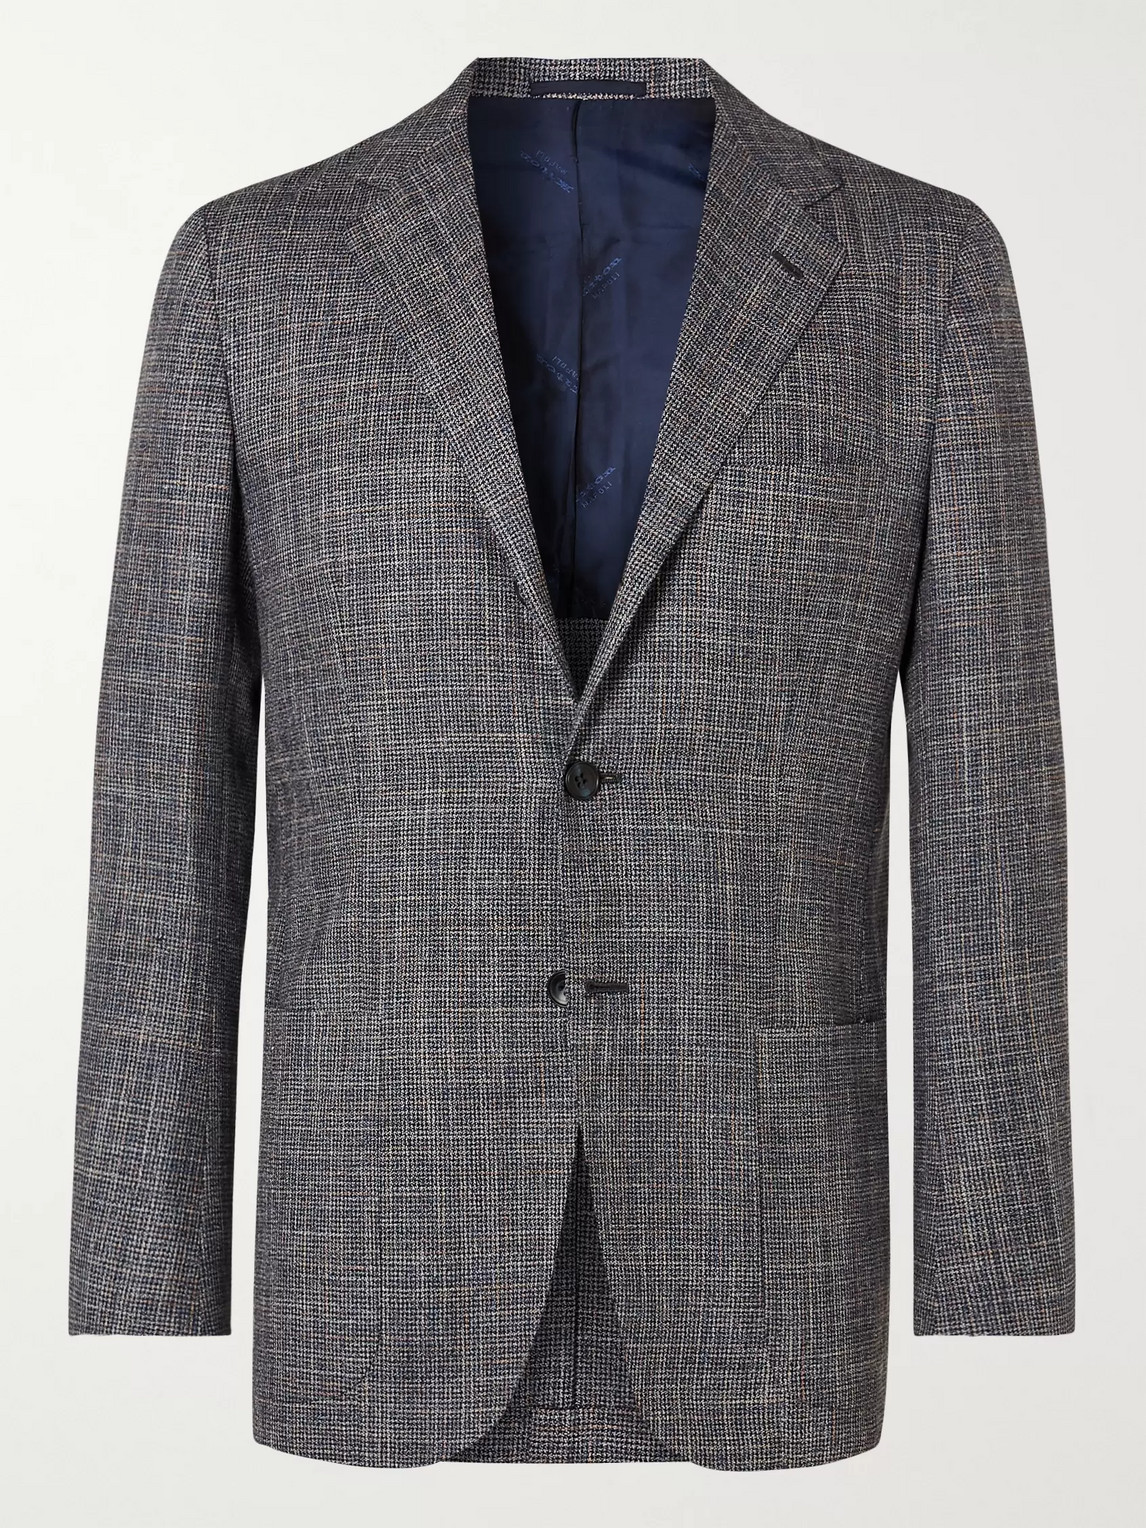 Kiton Puppytooth Cashmere, Virgin Wool, Silk And Linen-blend Suit Jacket In Multi